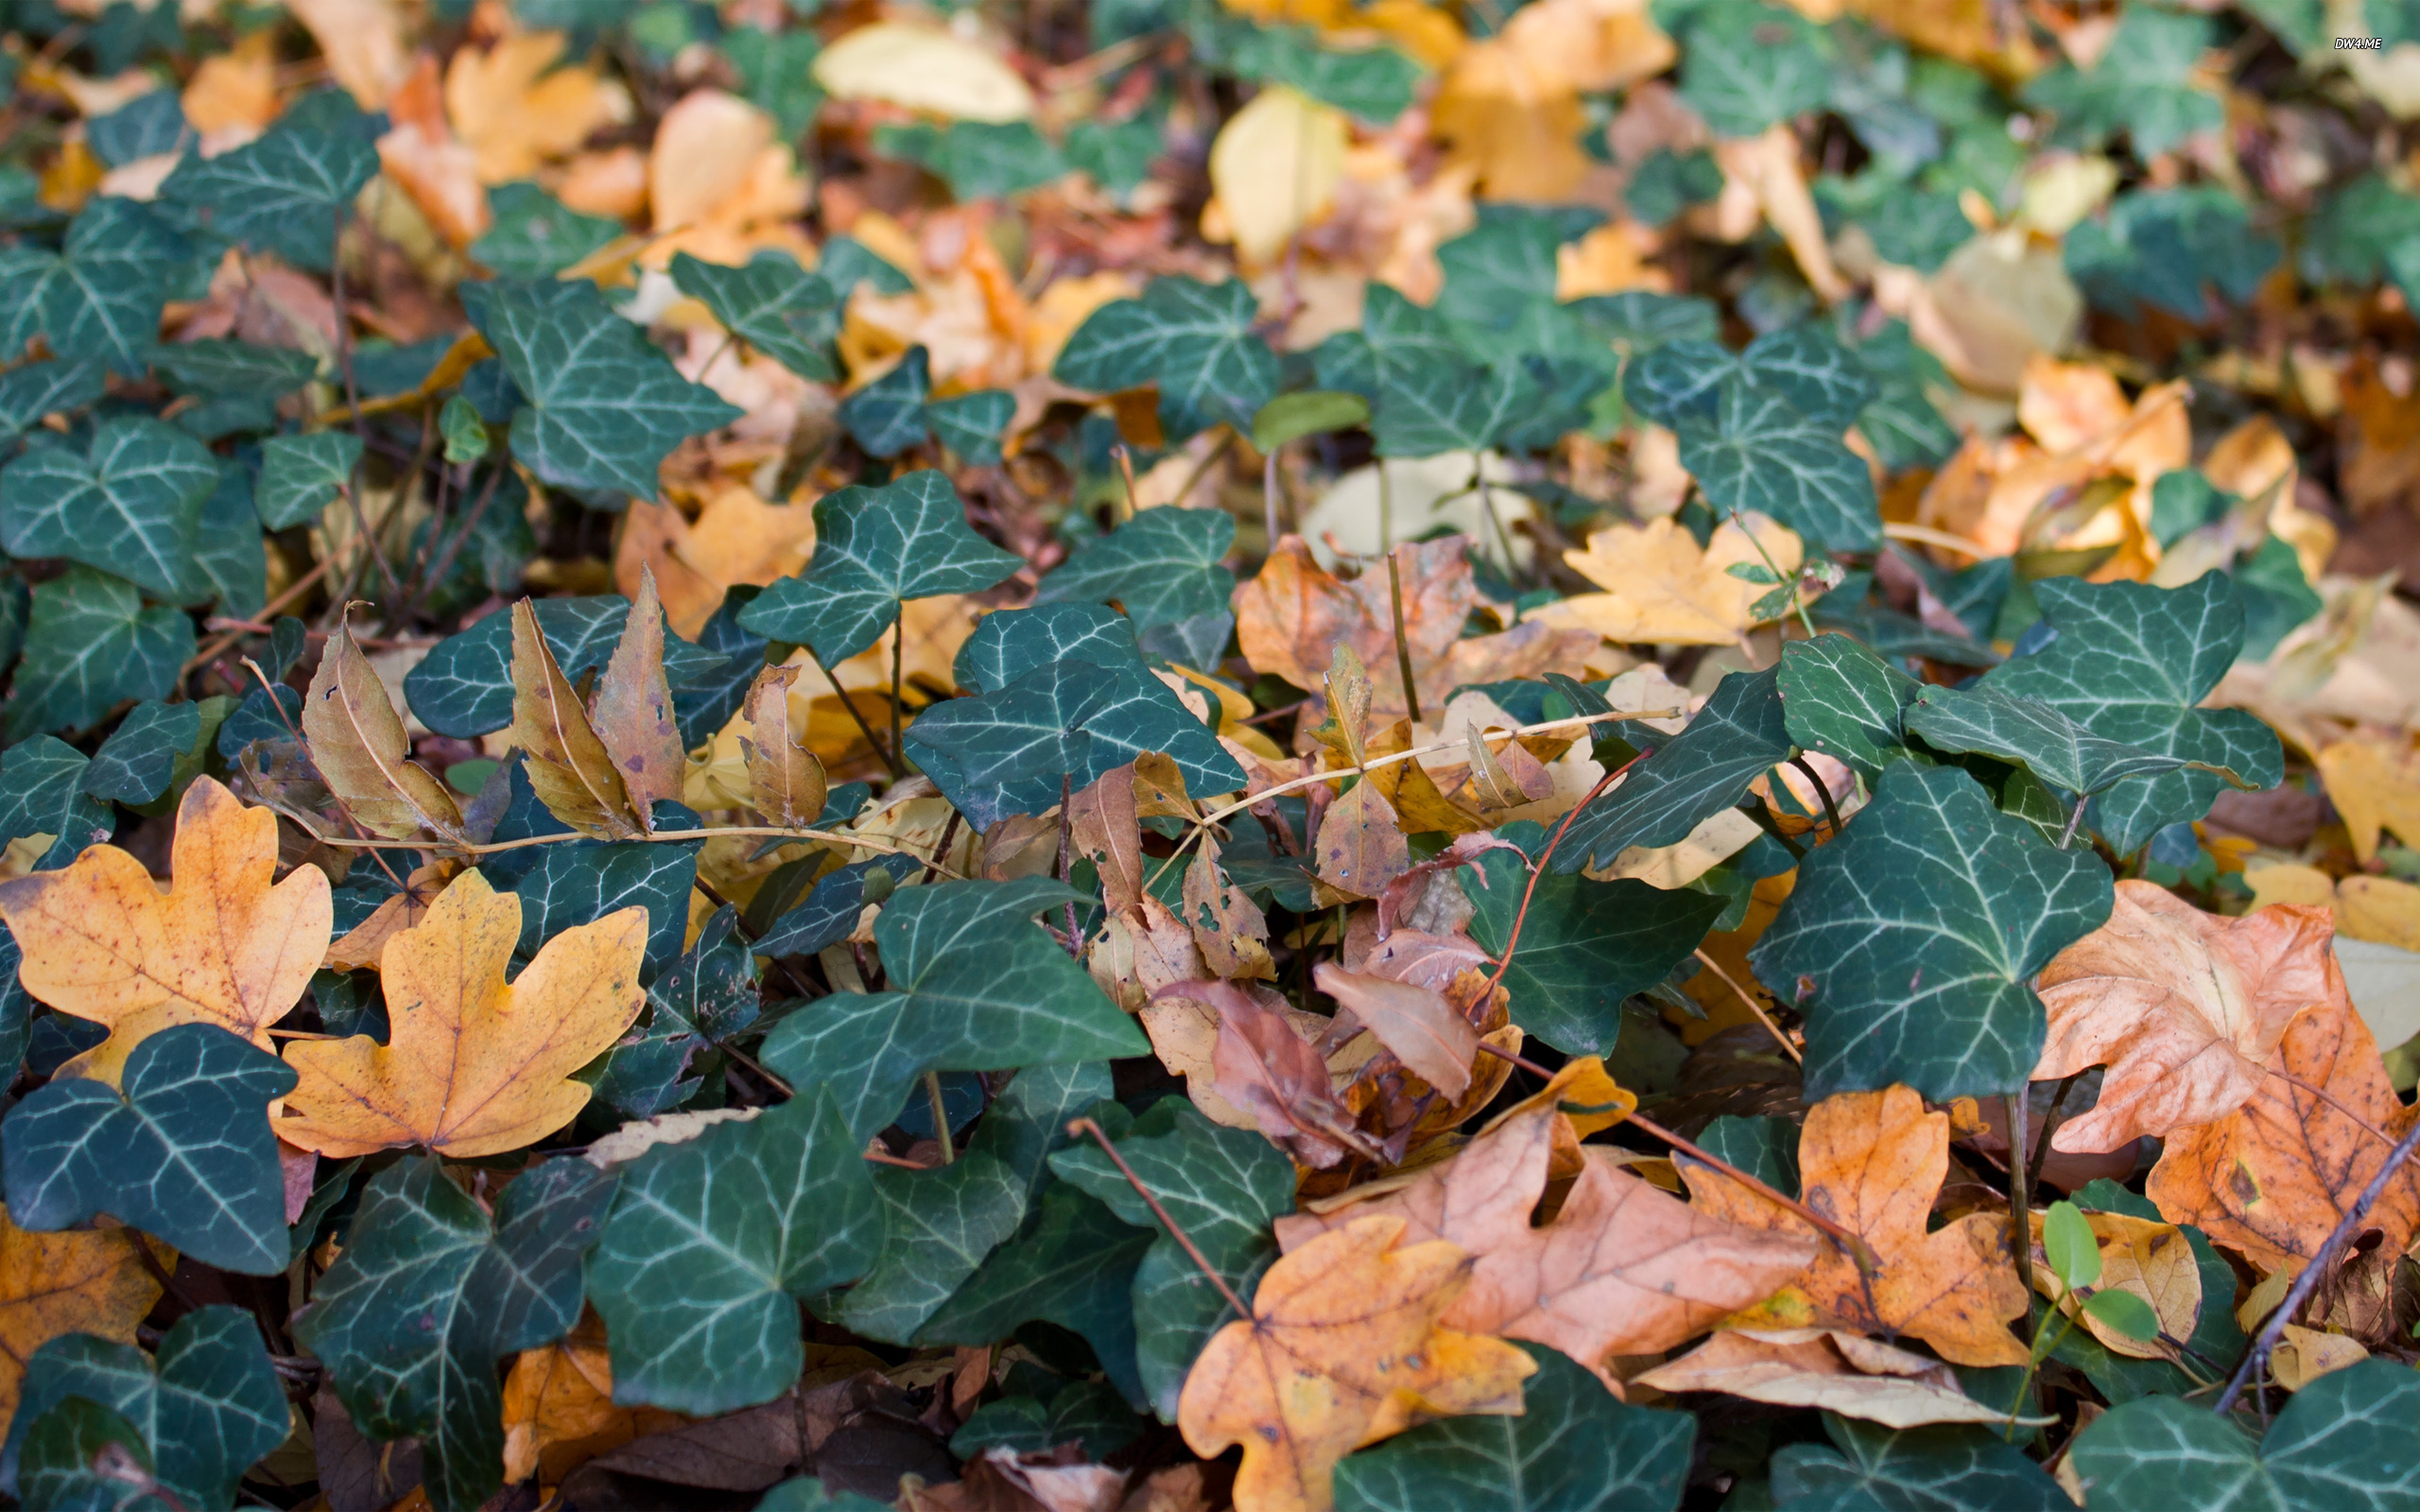 Ivy and fallen leaves wallpaper - Nature wallpapers - #961